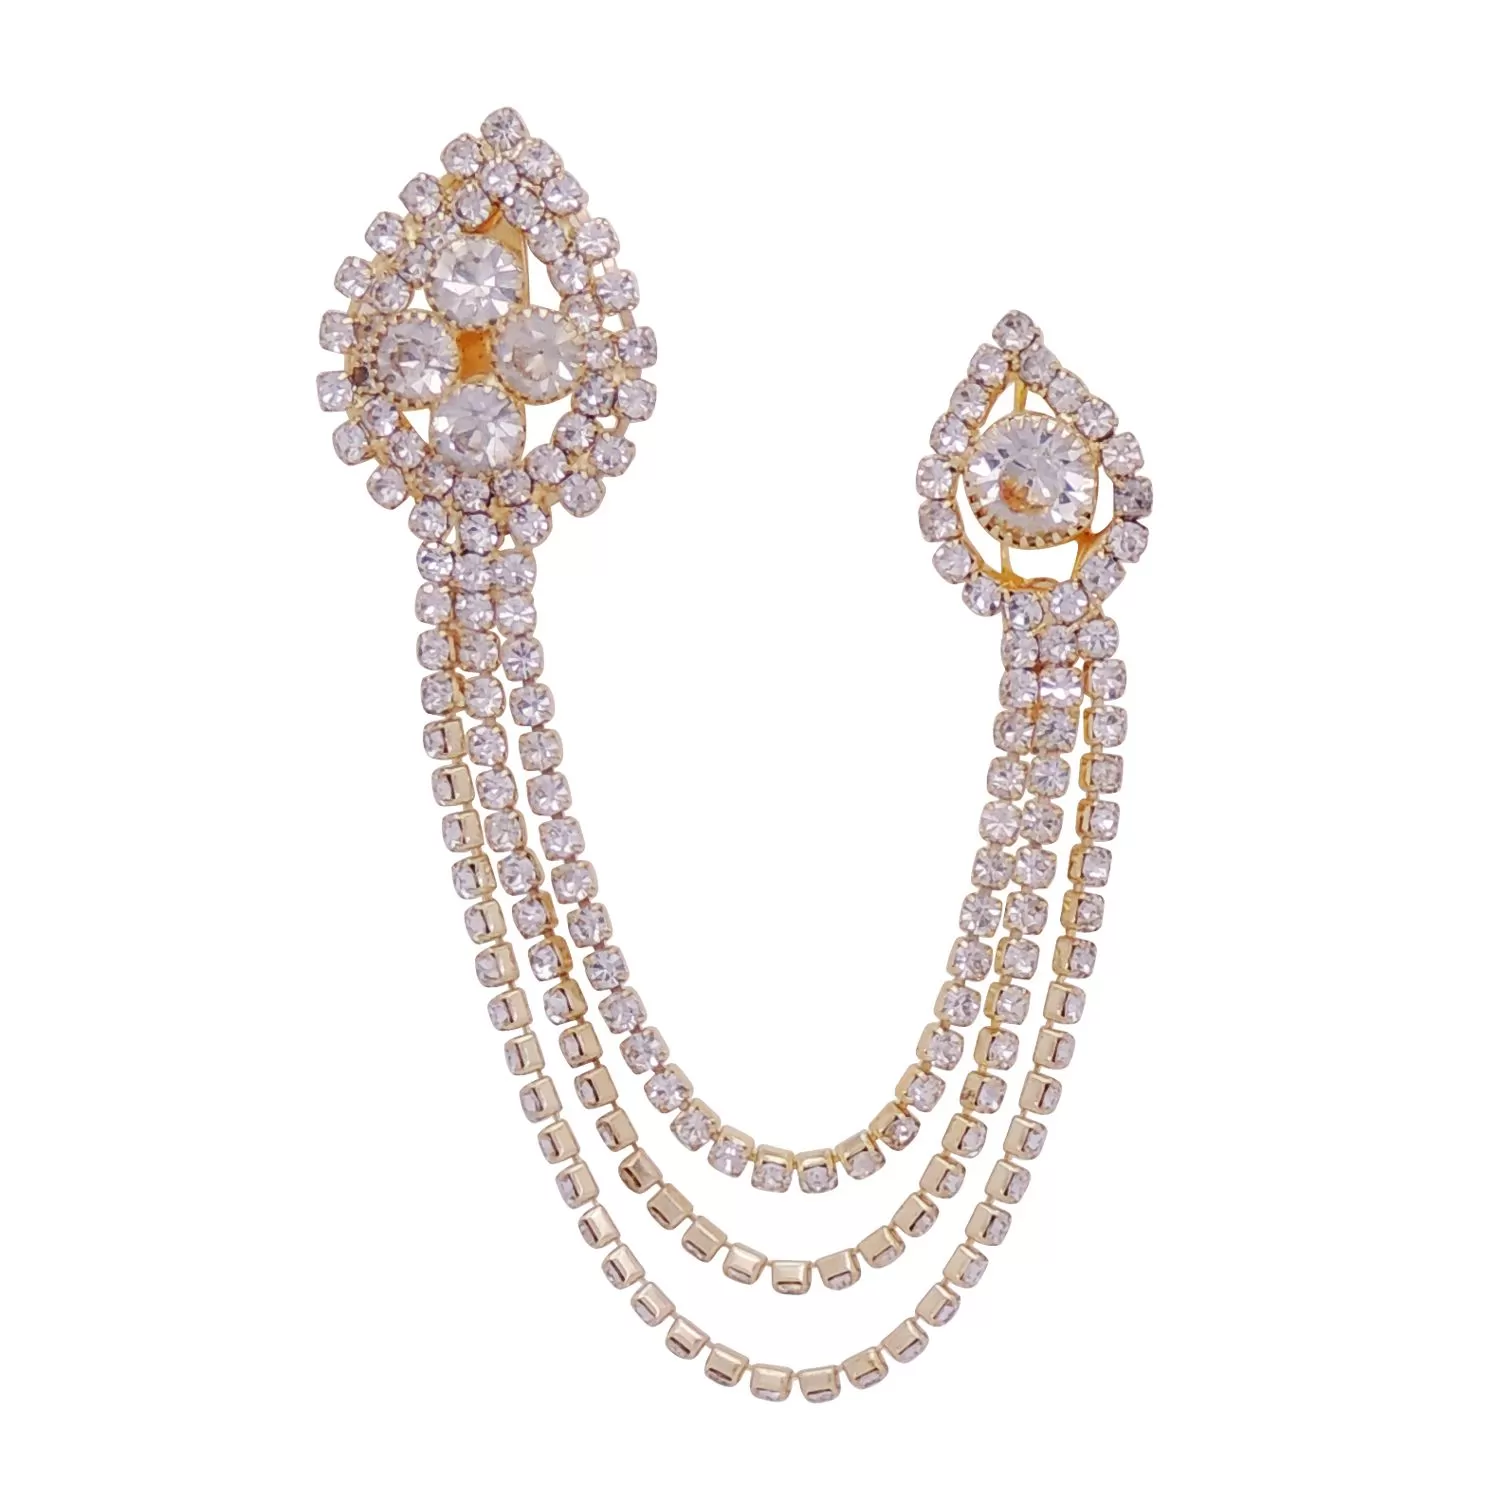 Zirconia Flower Golden Metal Chain with Semi-Precious Cubic Zirconia Brooch (Pack of 1 Pc.)